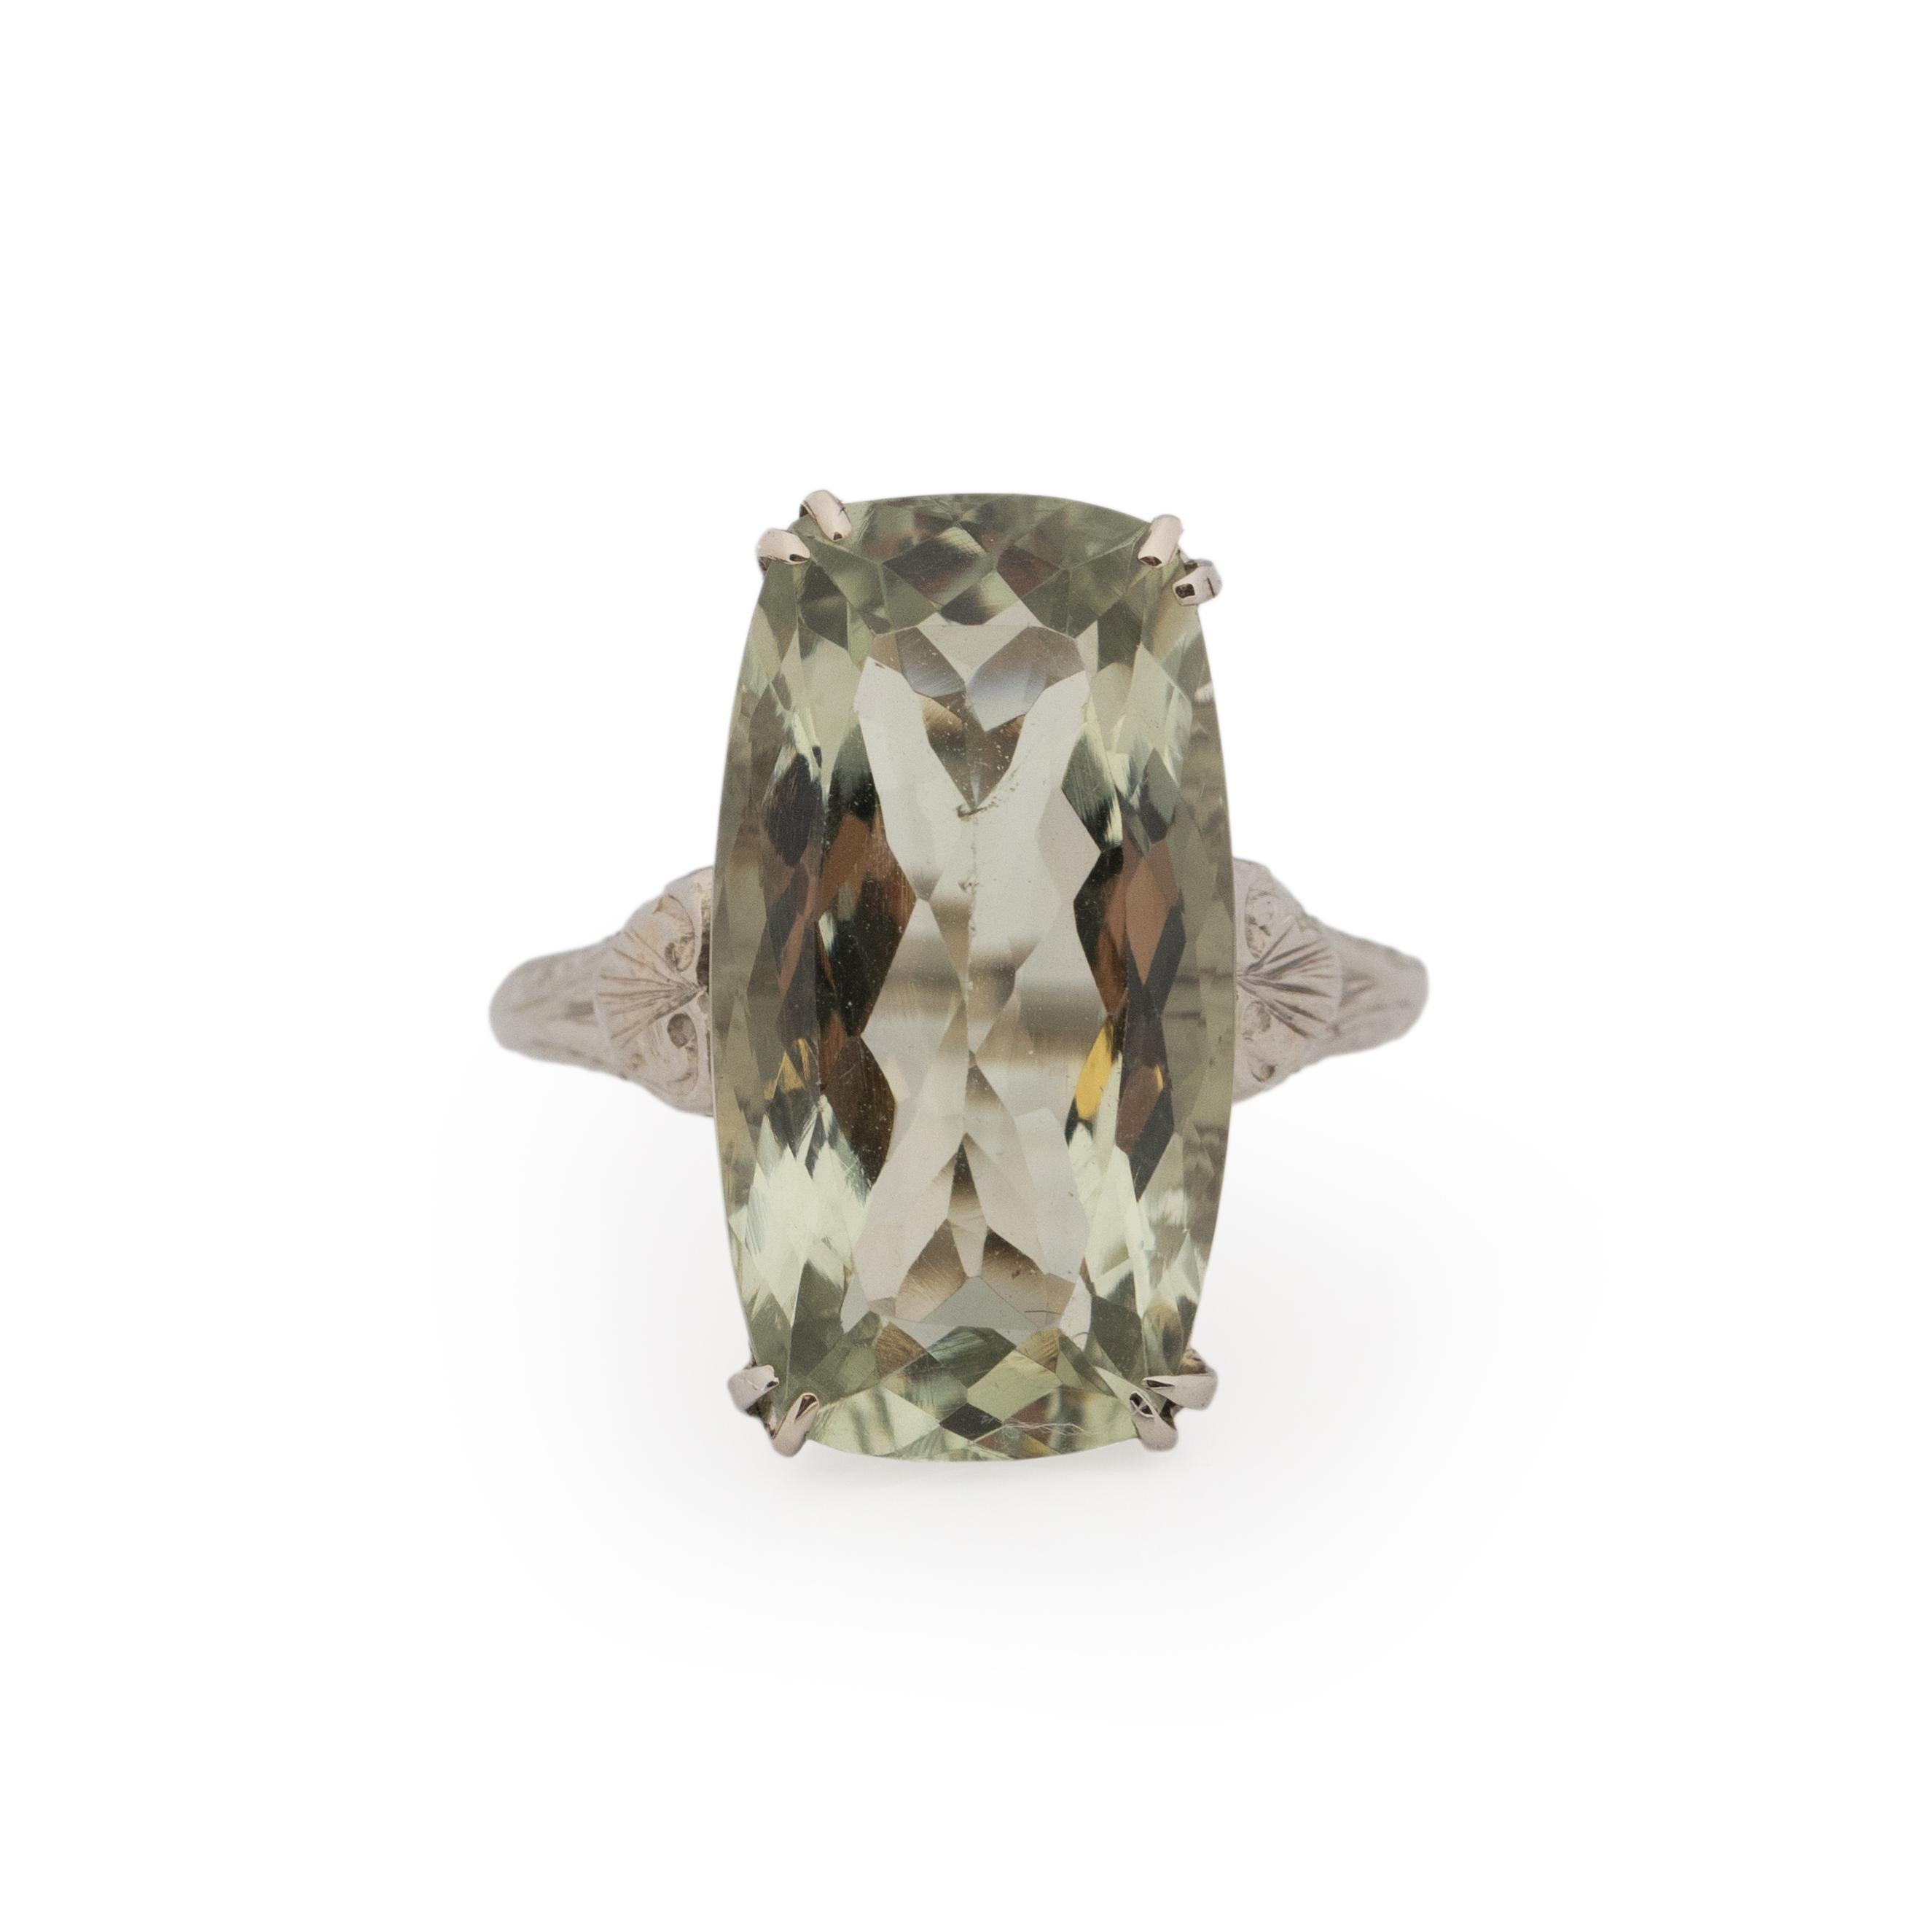 Here we have a fantastic smoking ring! This rectangle cushion cut spinel is an outstanding minty blue hue that is not something that you see every day. This minty color is breathtaking, every facet catches the light with ease drawing every eye in.